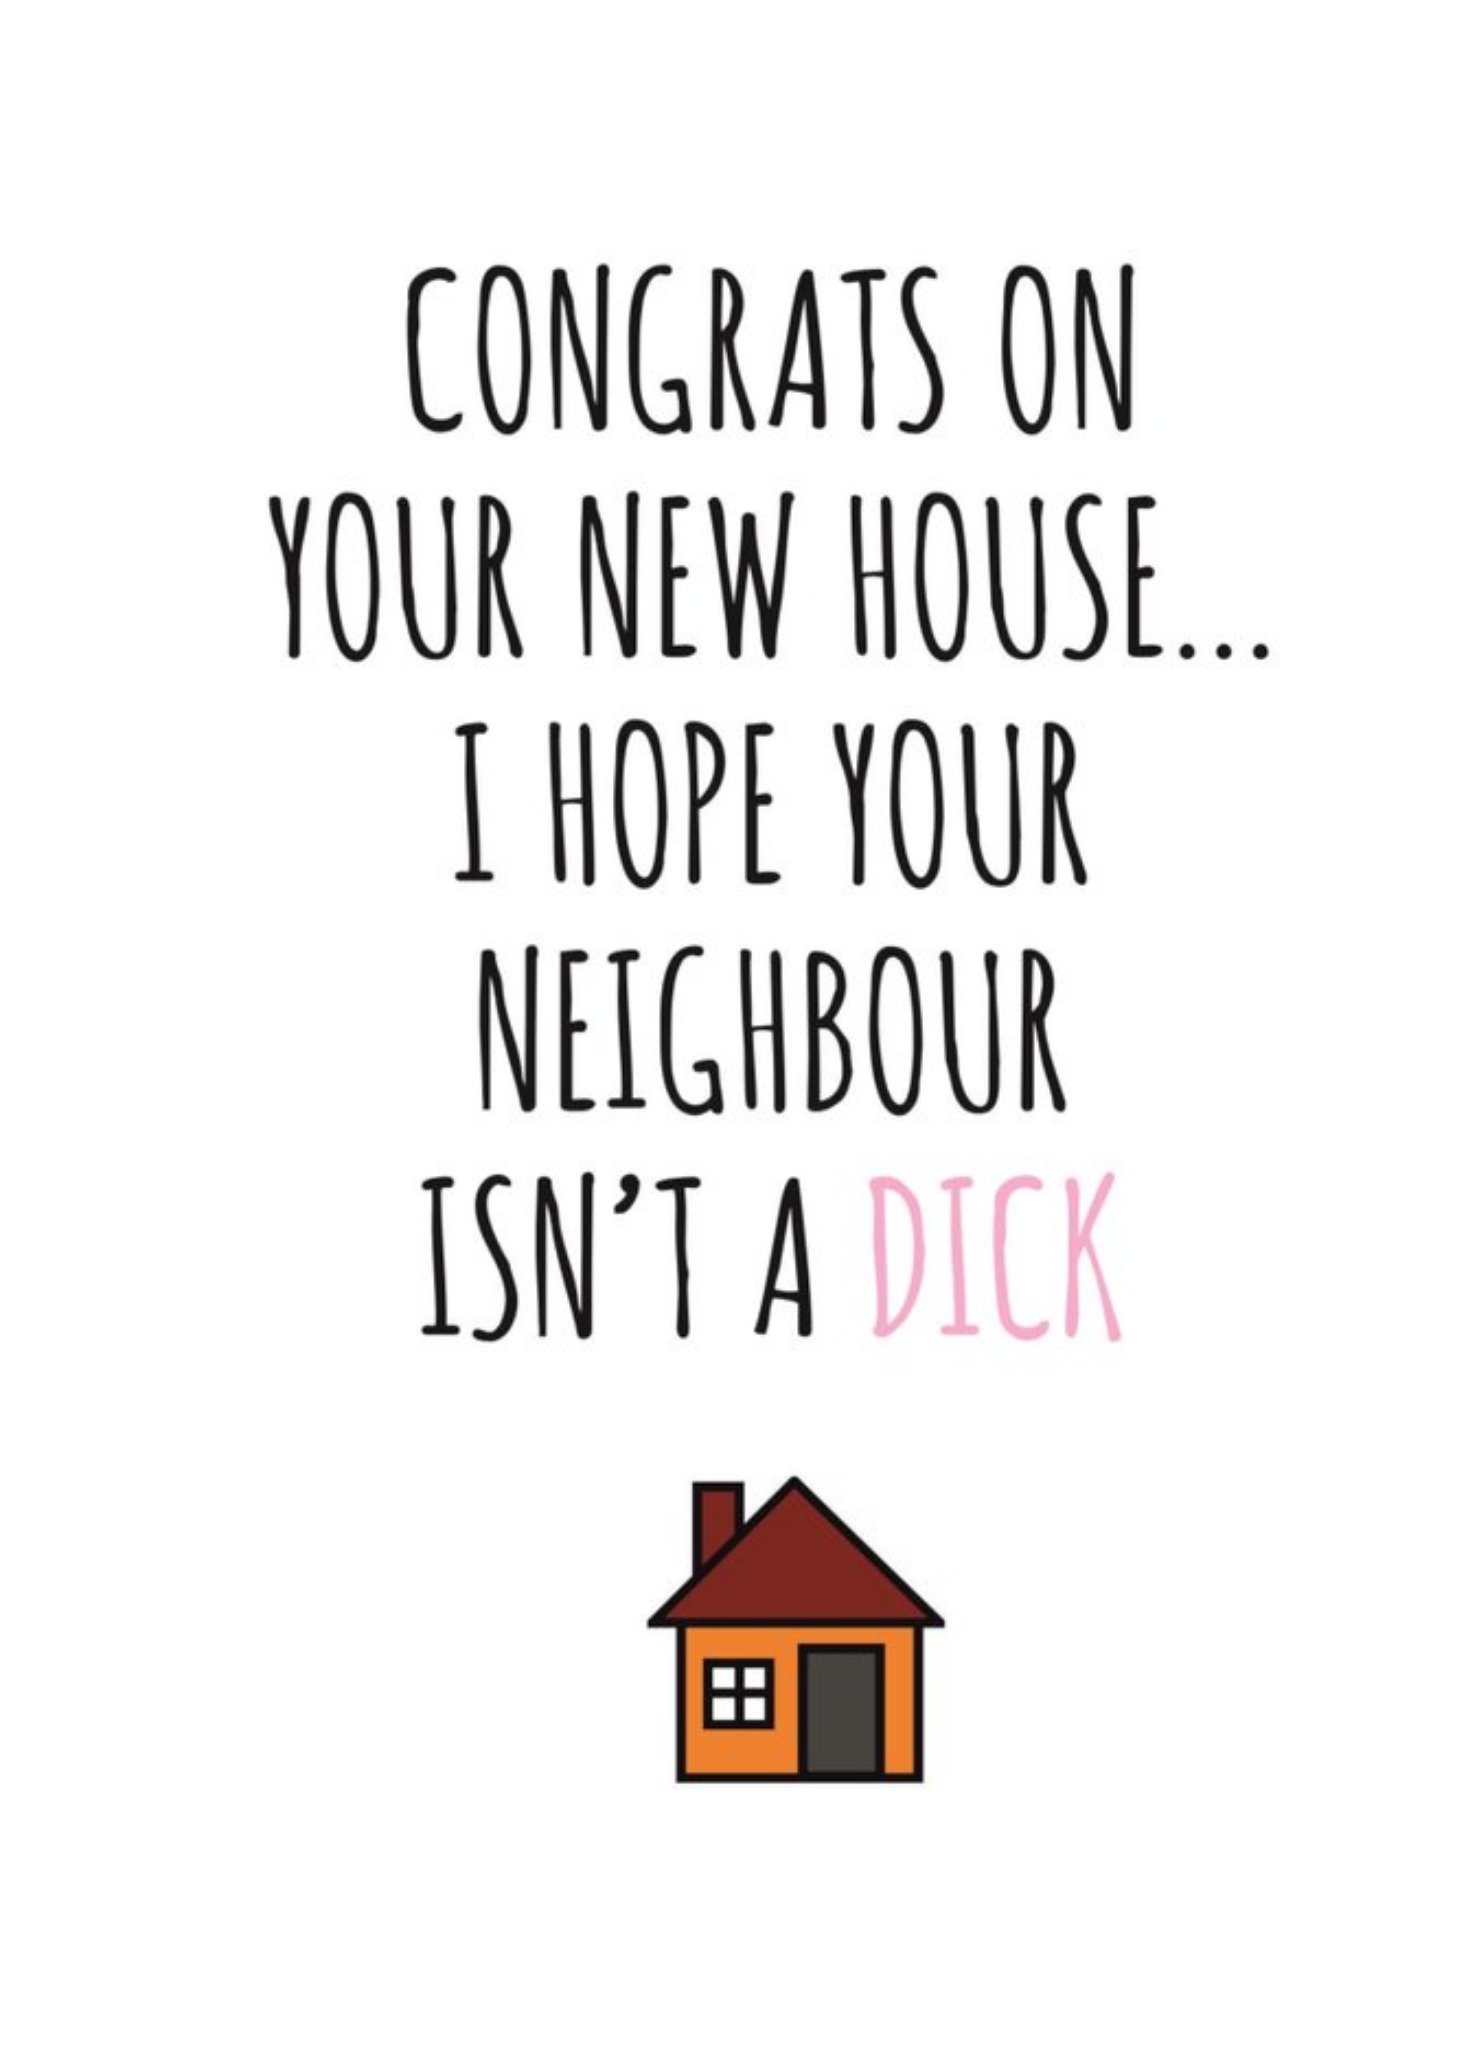 Banter King Typographical Congratulations On Your New House I Hope Your Neighbor Isnt A Dick Card Ec